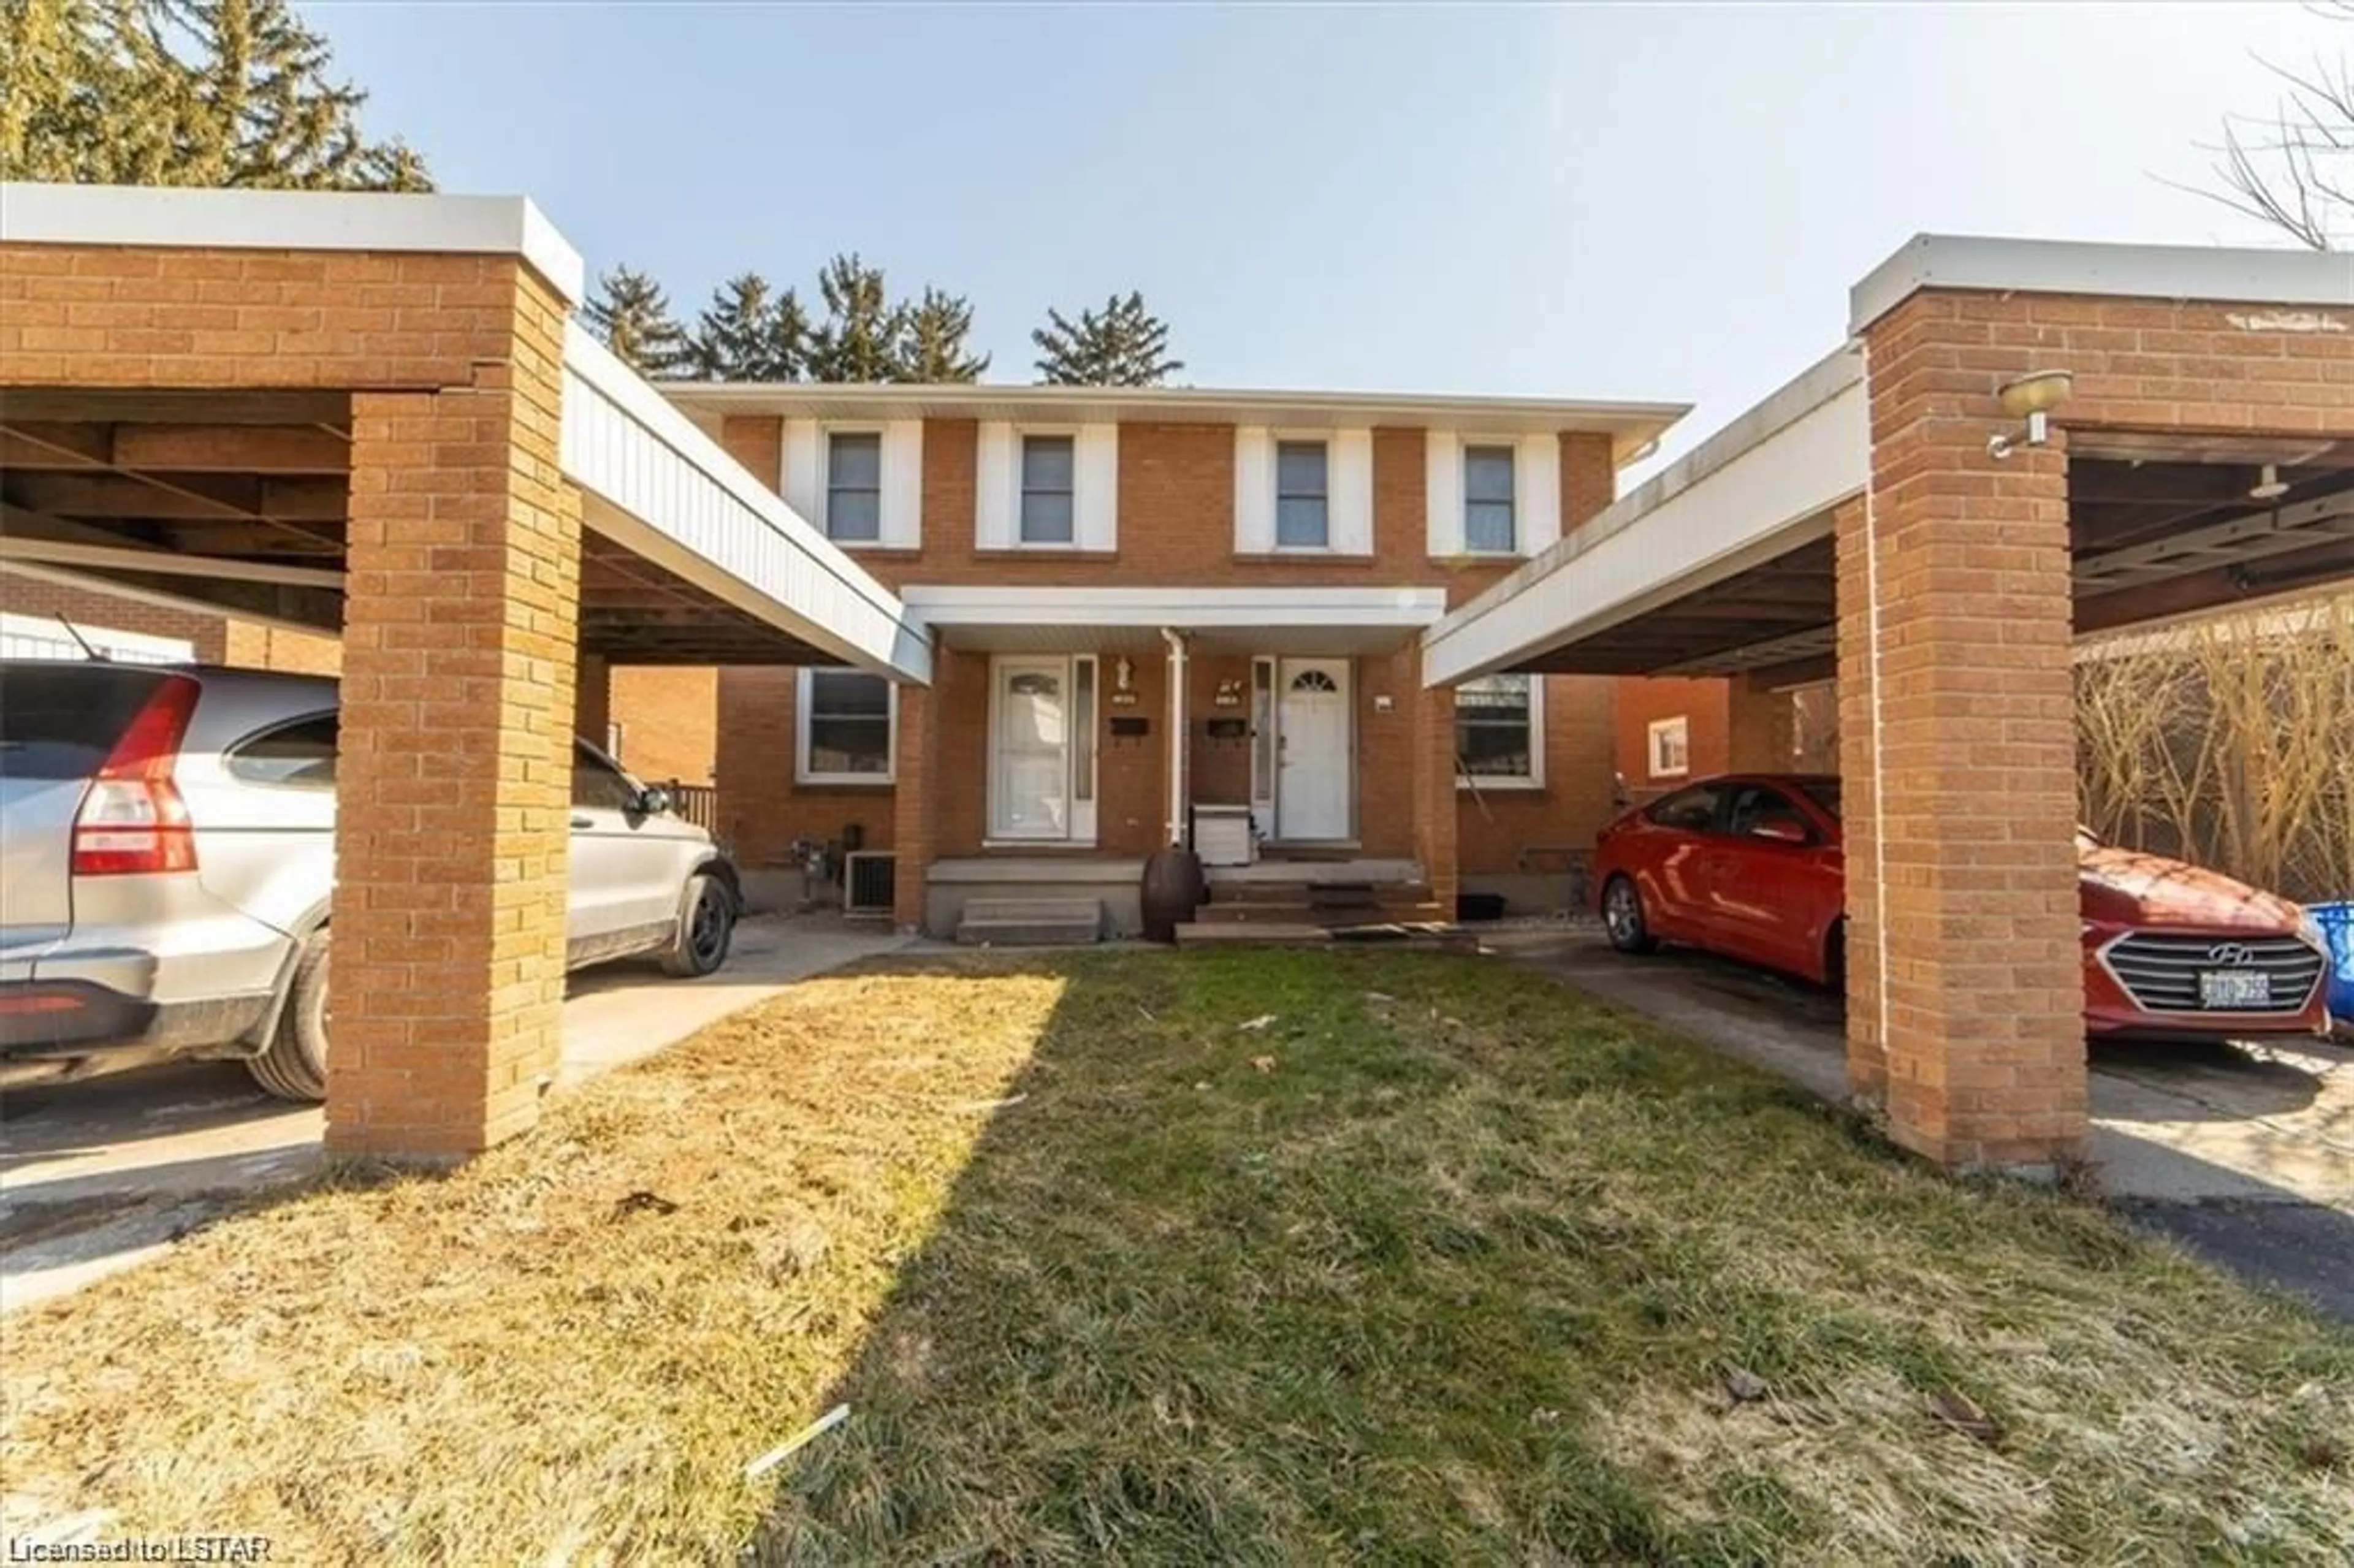 Home with brick exterior material for 108 Marlborough Ave, London Ontario N5Z 3S6